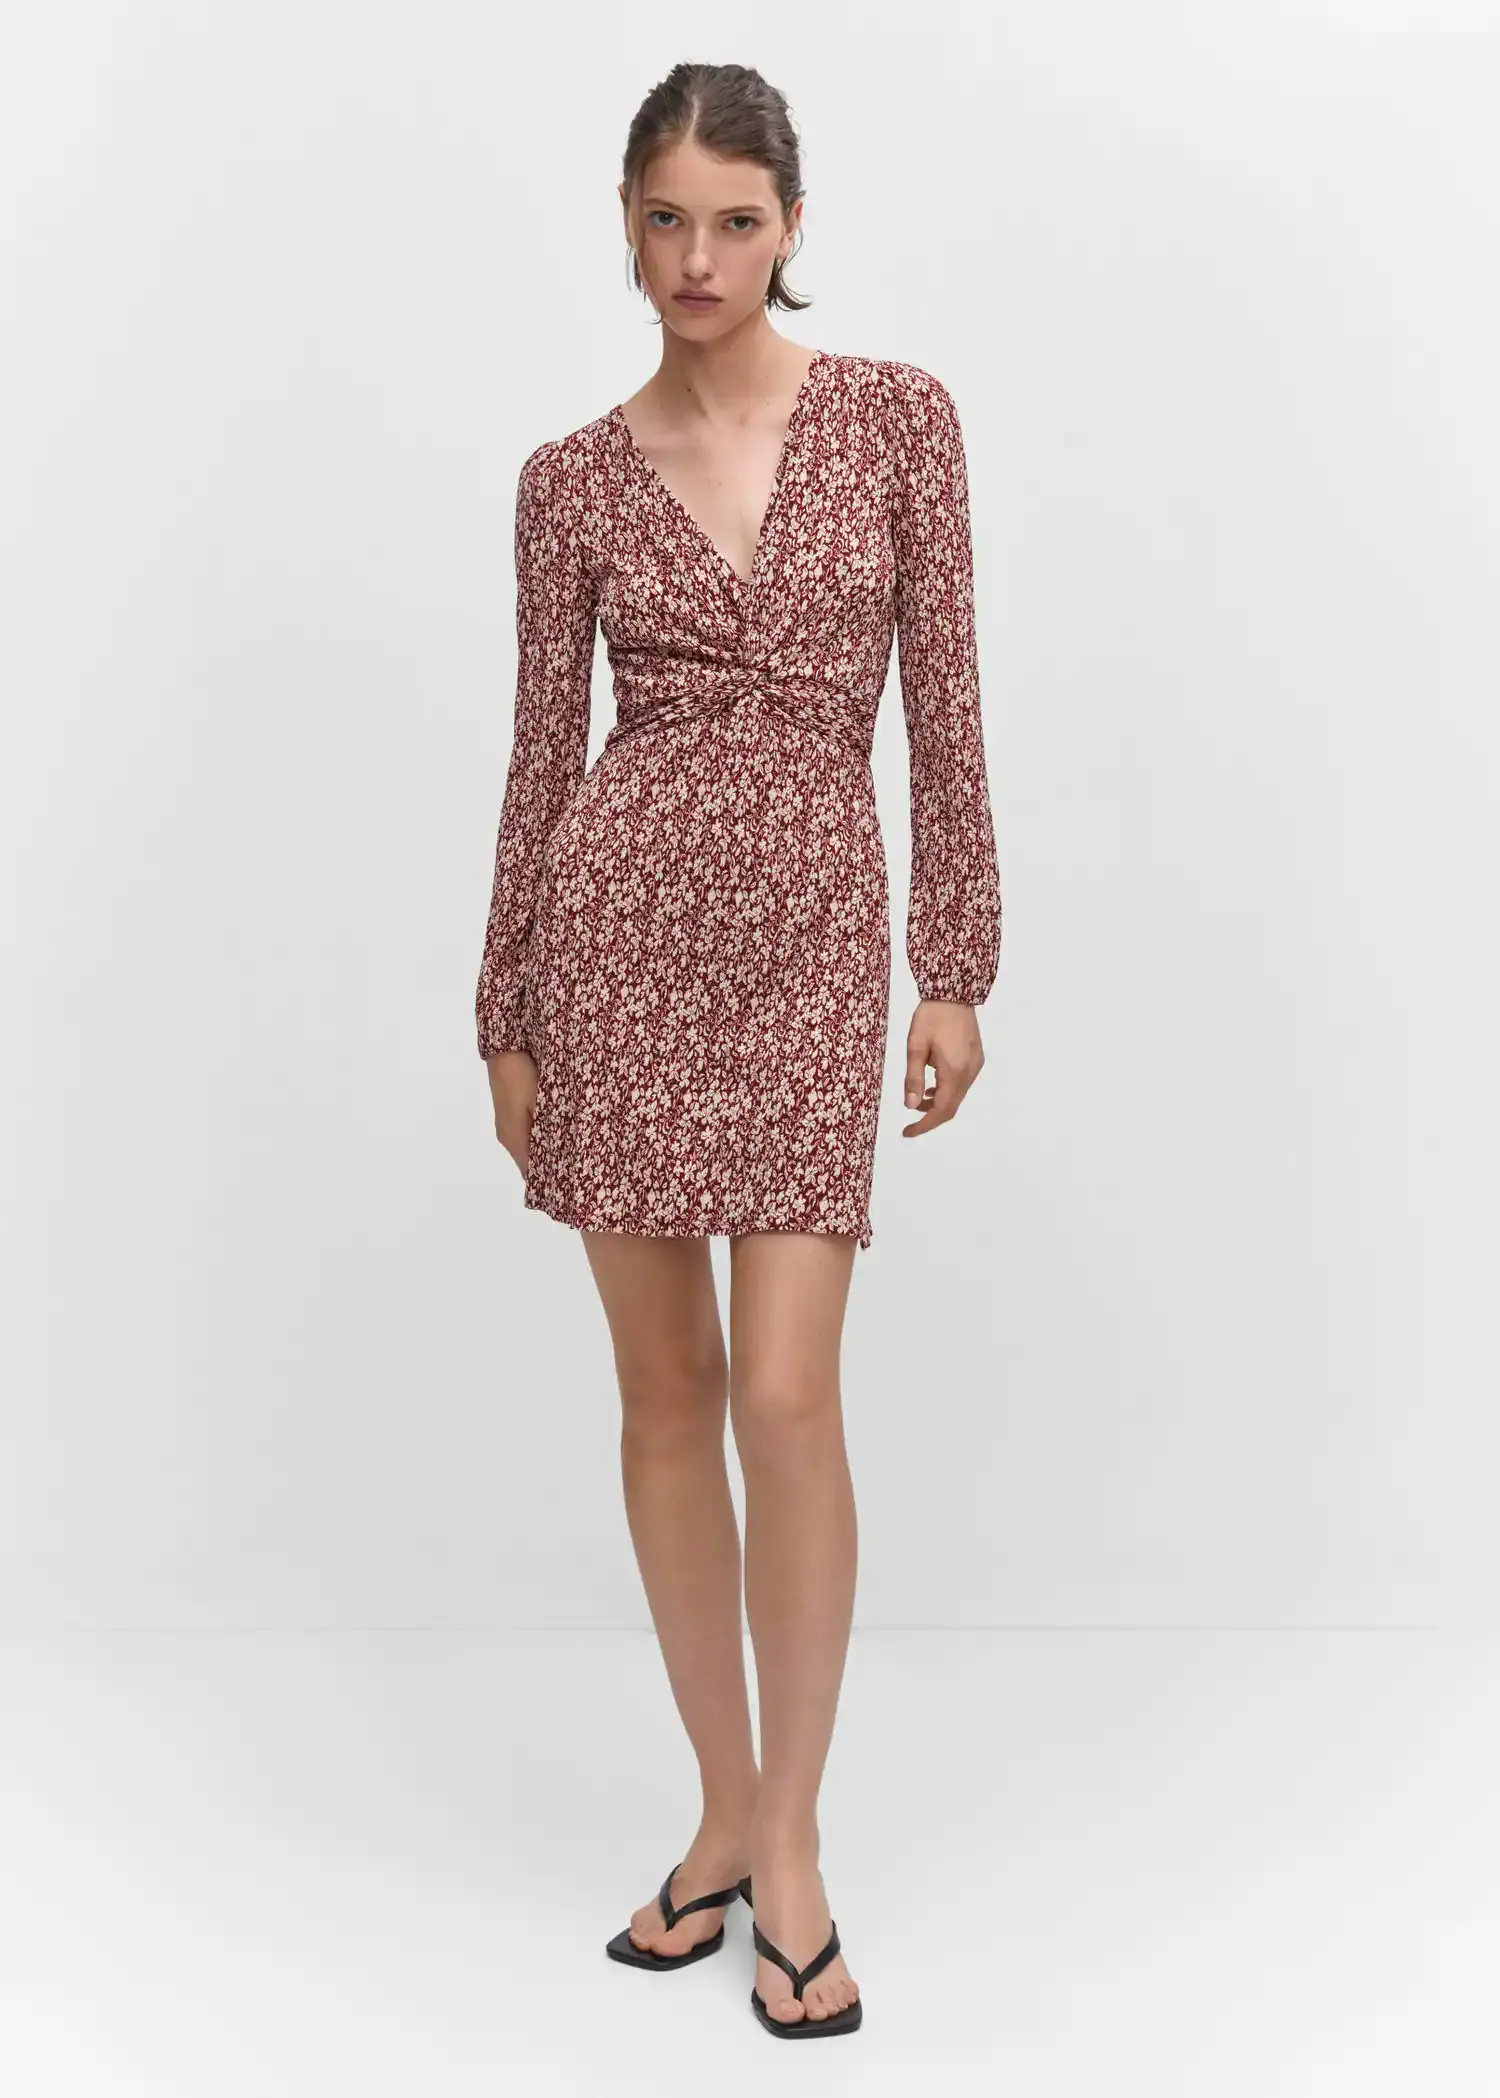 Mango Short printed dress with knot detail. 2